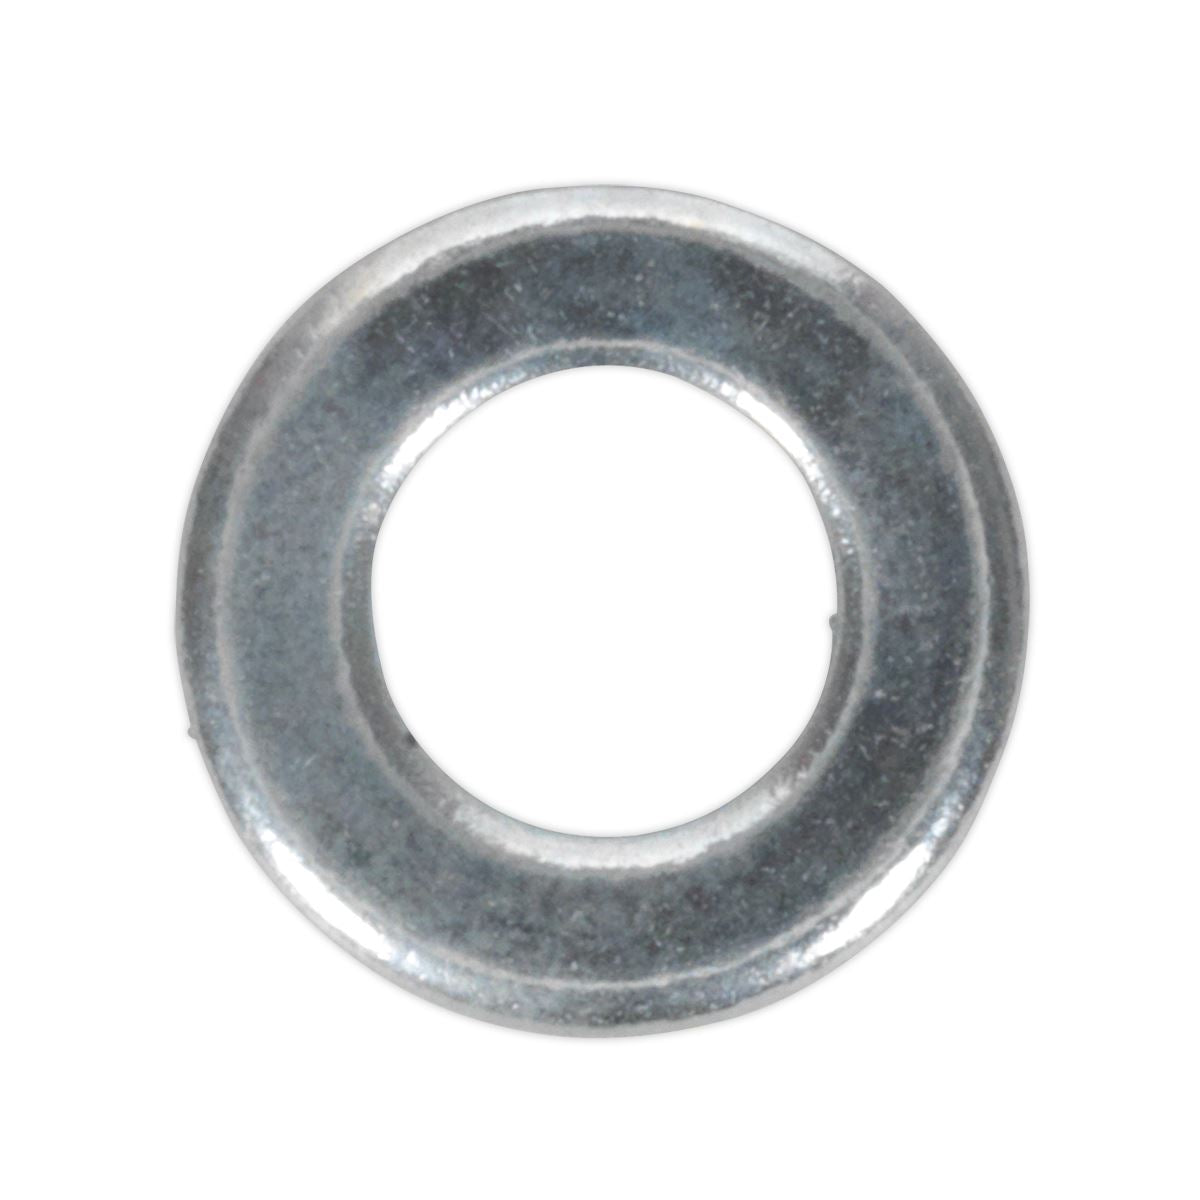 Sealey Flat Washer DIN 125 - M5 x 10mm Form A Zinc Pack of 100